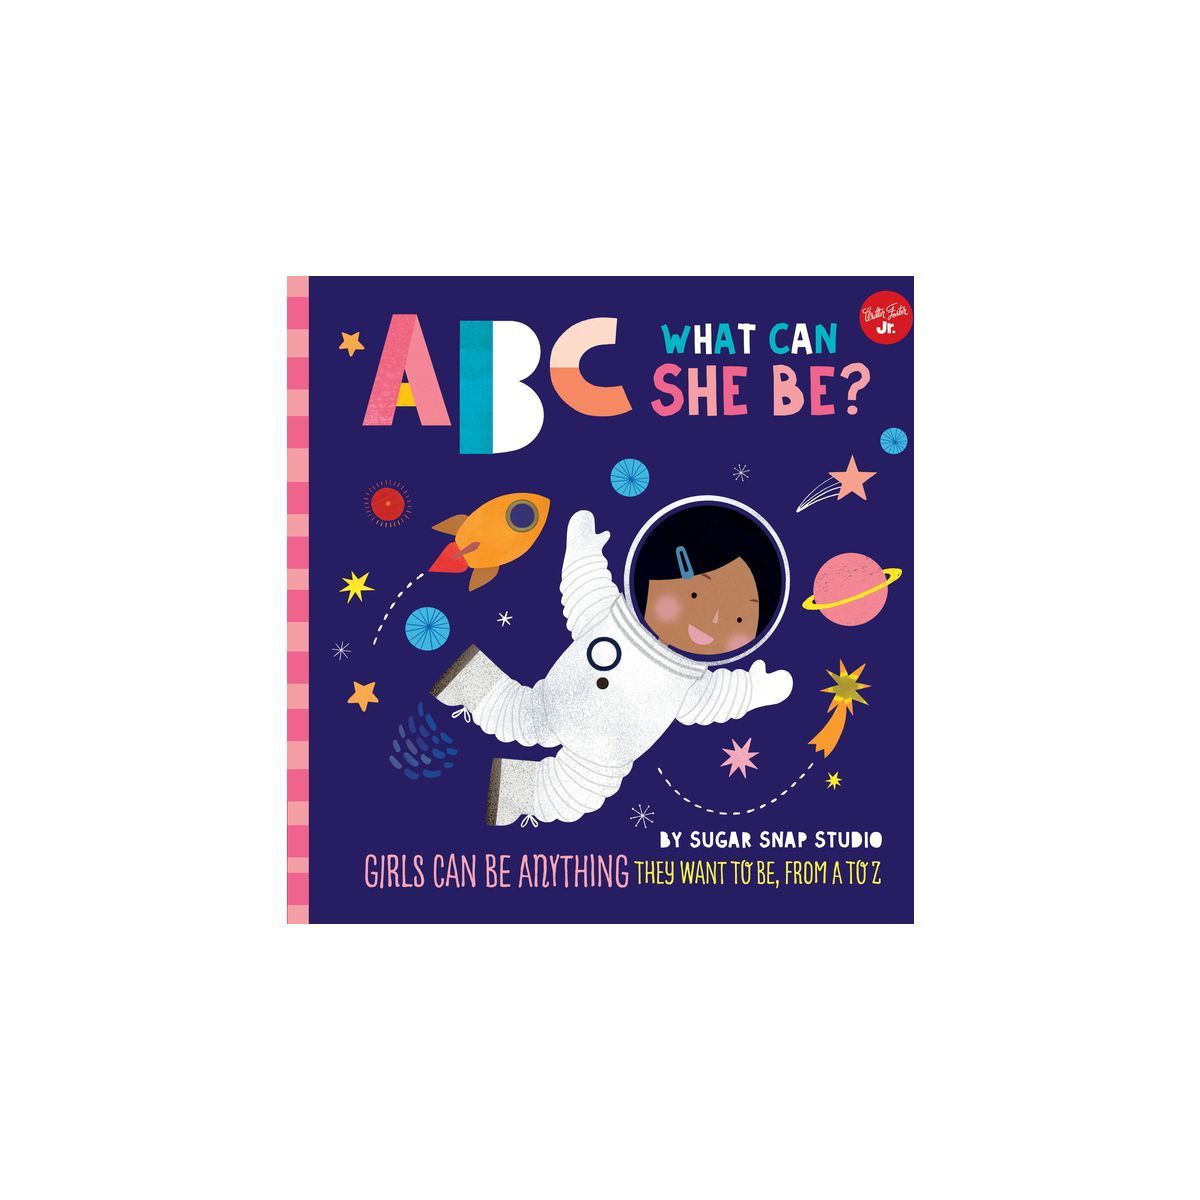 ABC for Me: ABC What Can She Be? - by Sugar Snap Studio & Jessie Ford | Target